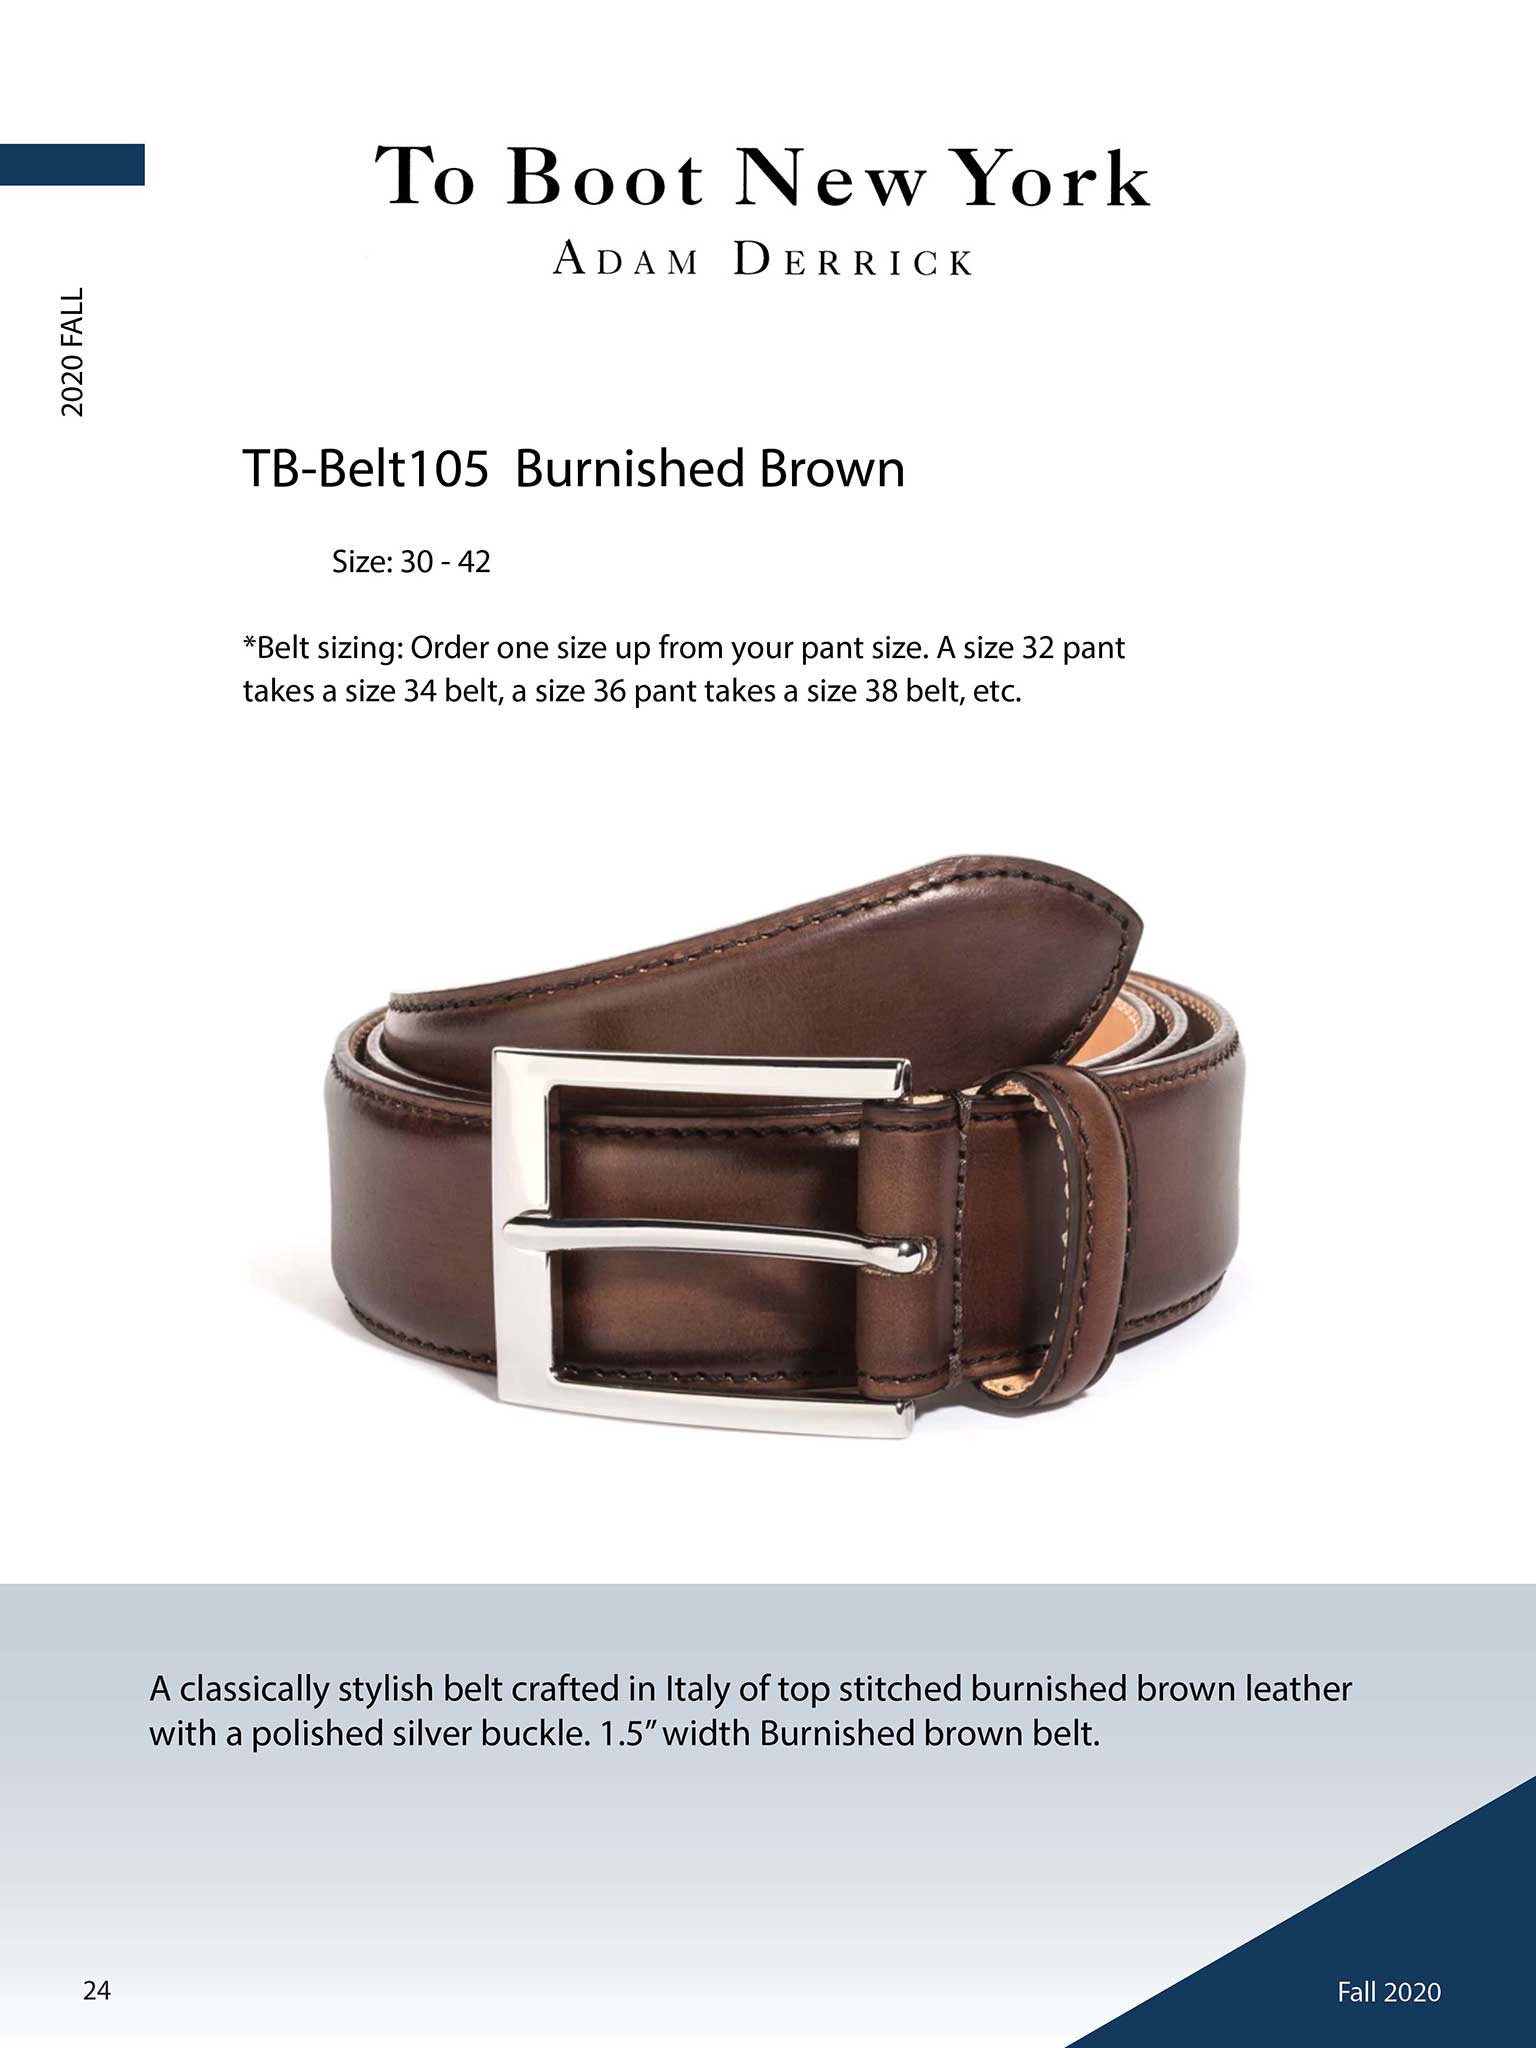 Burnished Brown Belt by To Boot New York